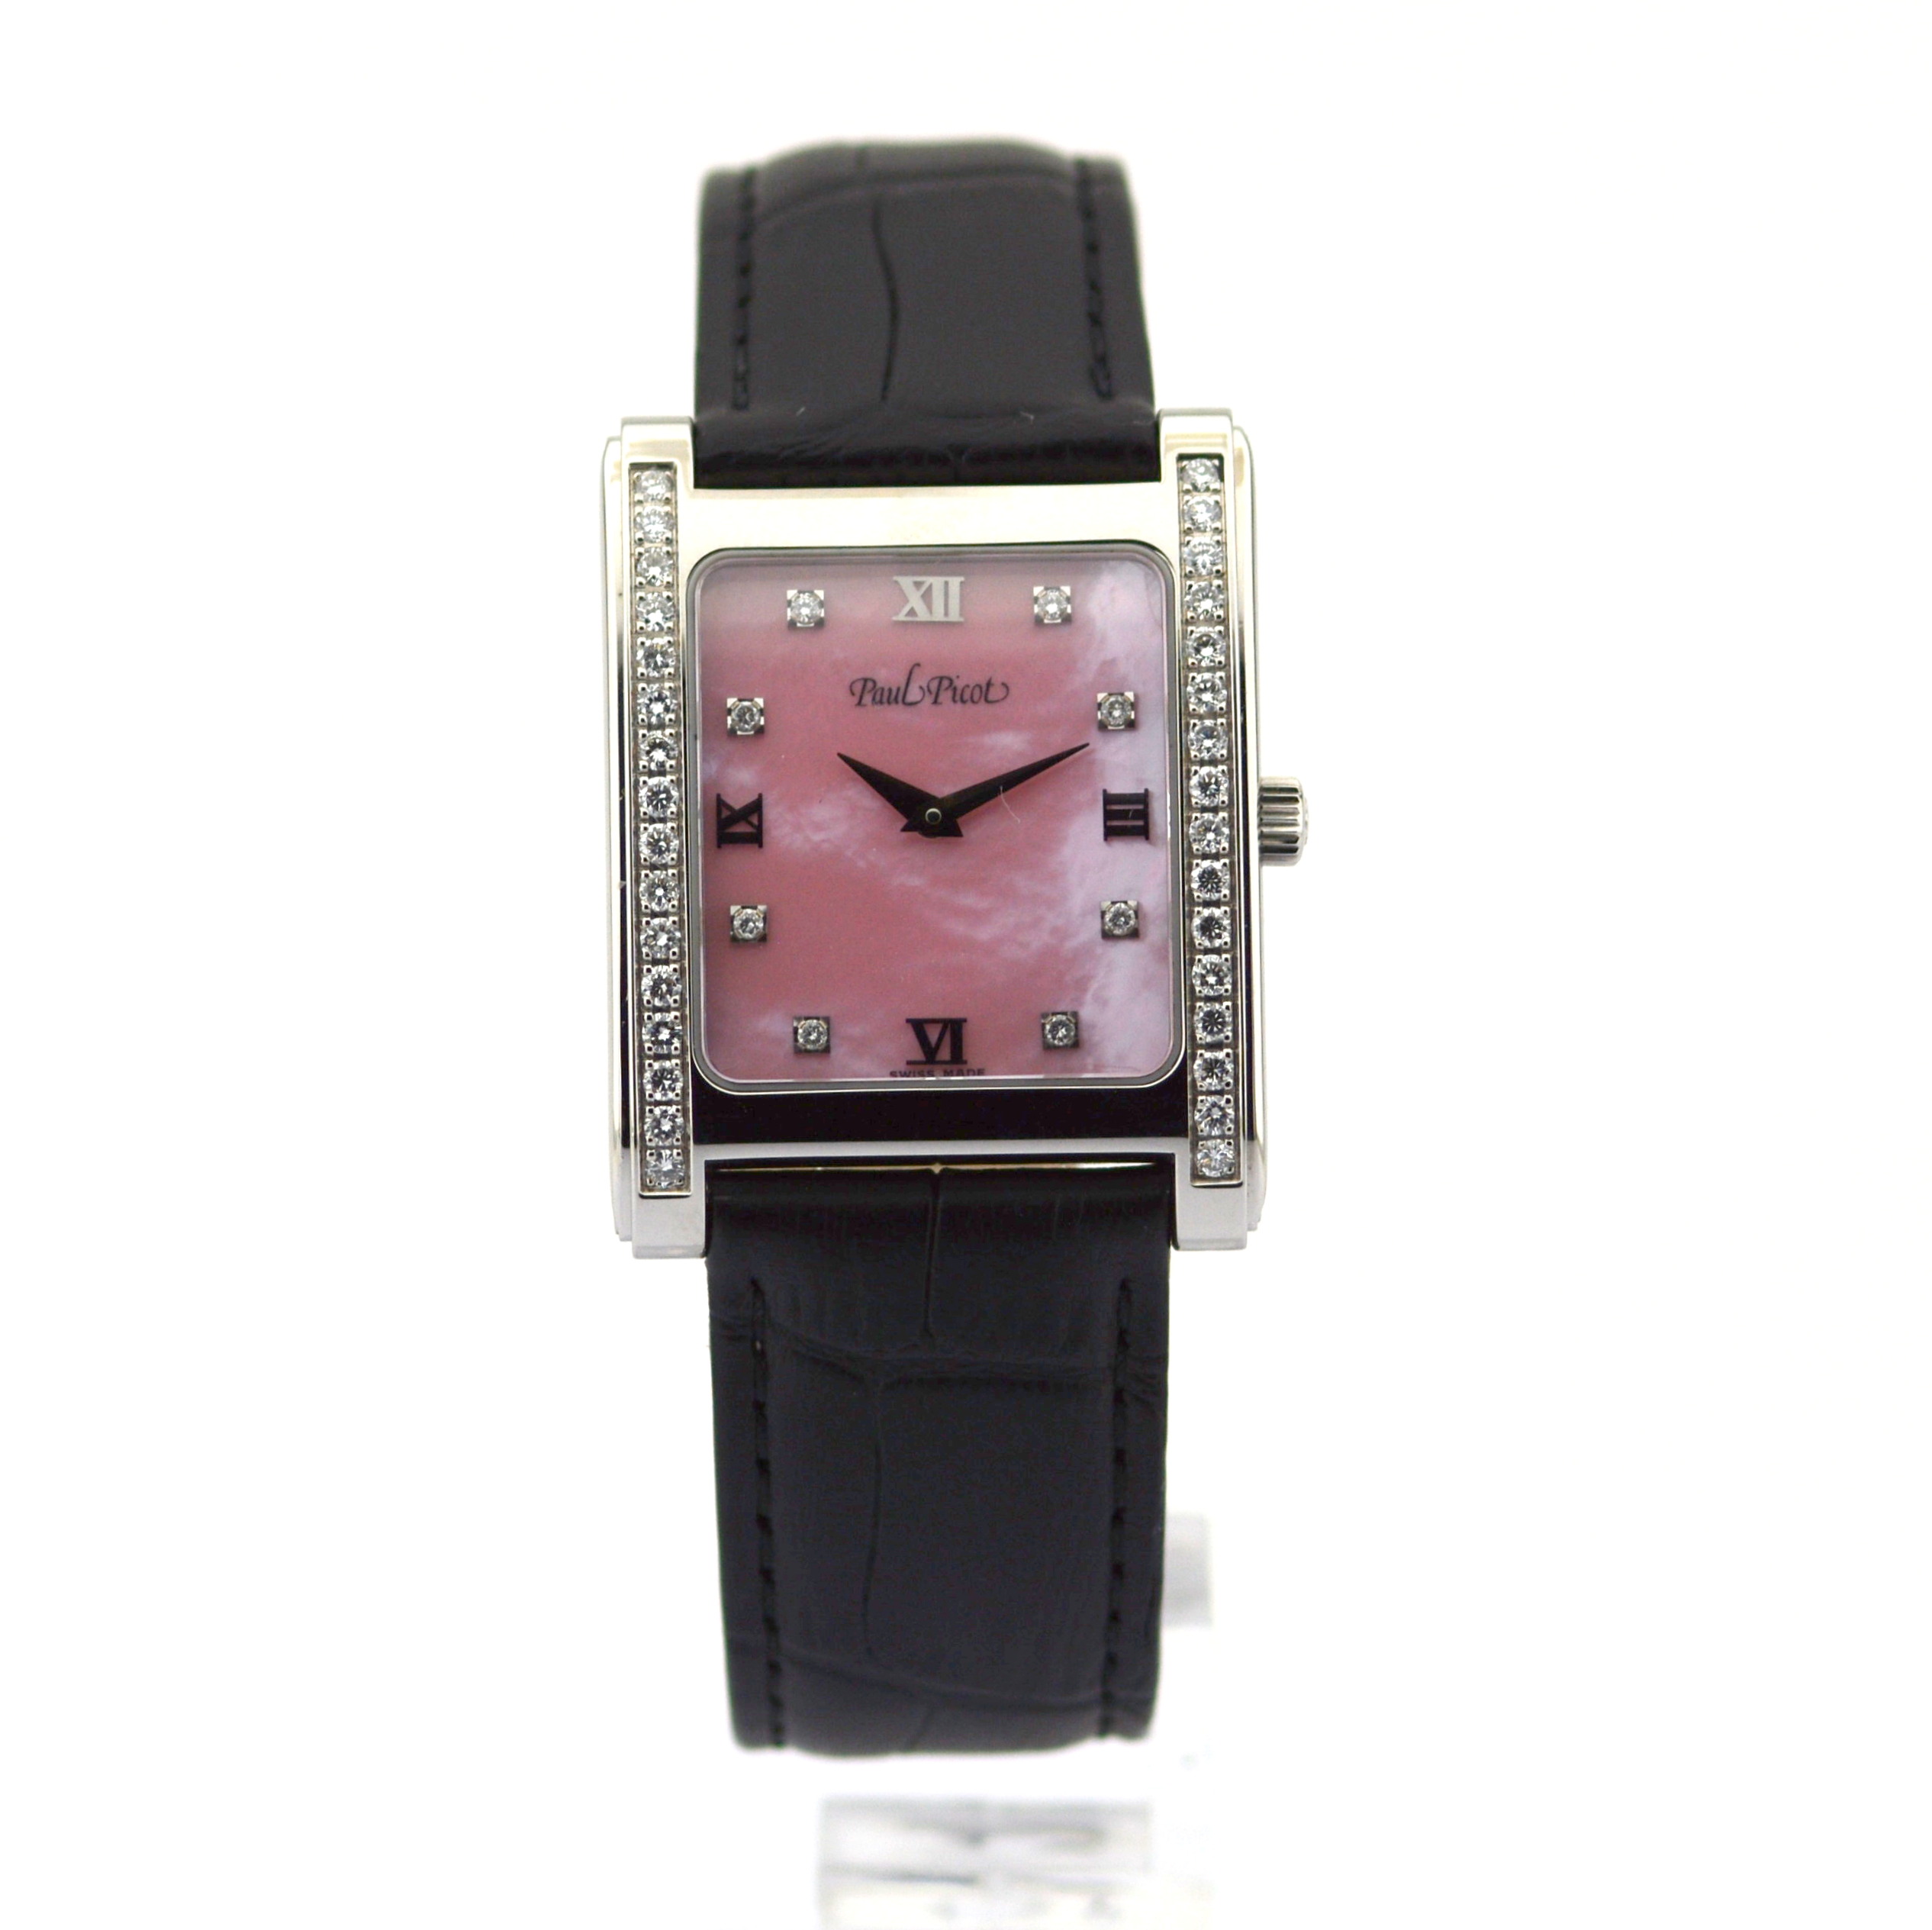 Paul Picot / 4079 Diamond Dial Diamond Case Mother of pearl - Lady's Steel Wrist Watch - Image 4 of 12